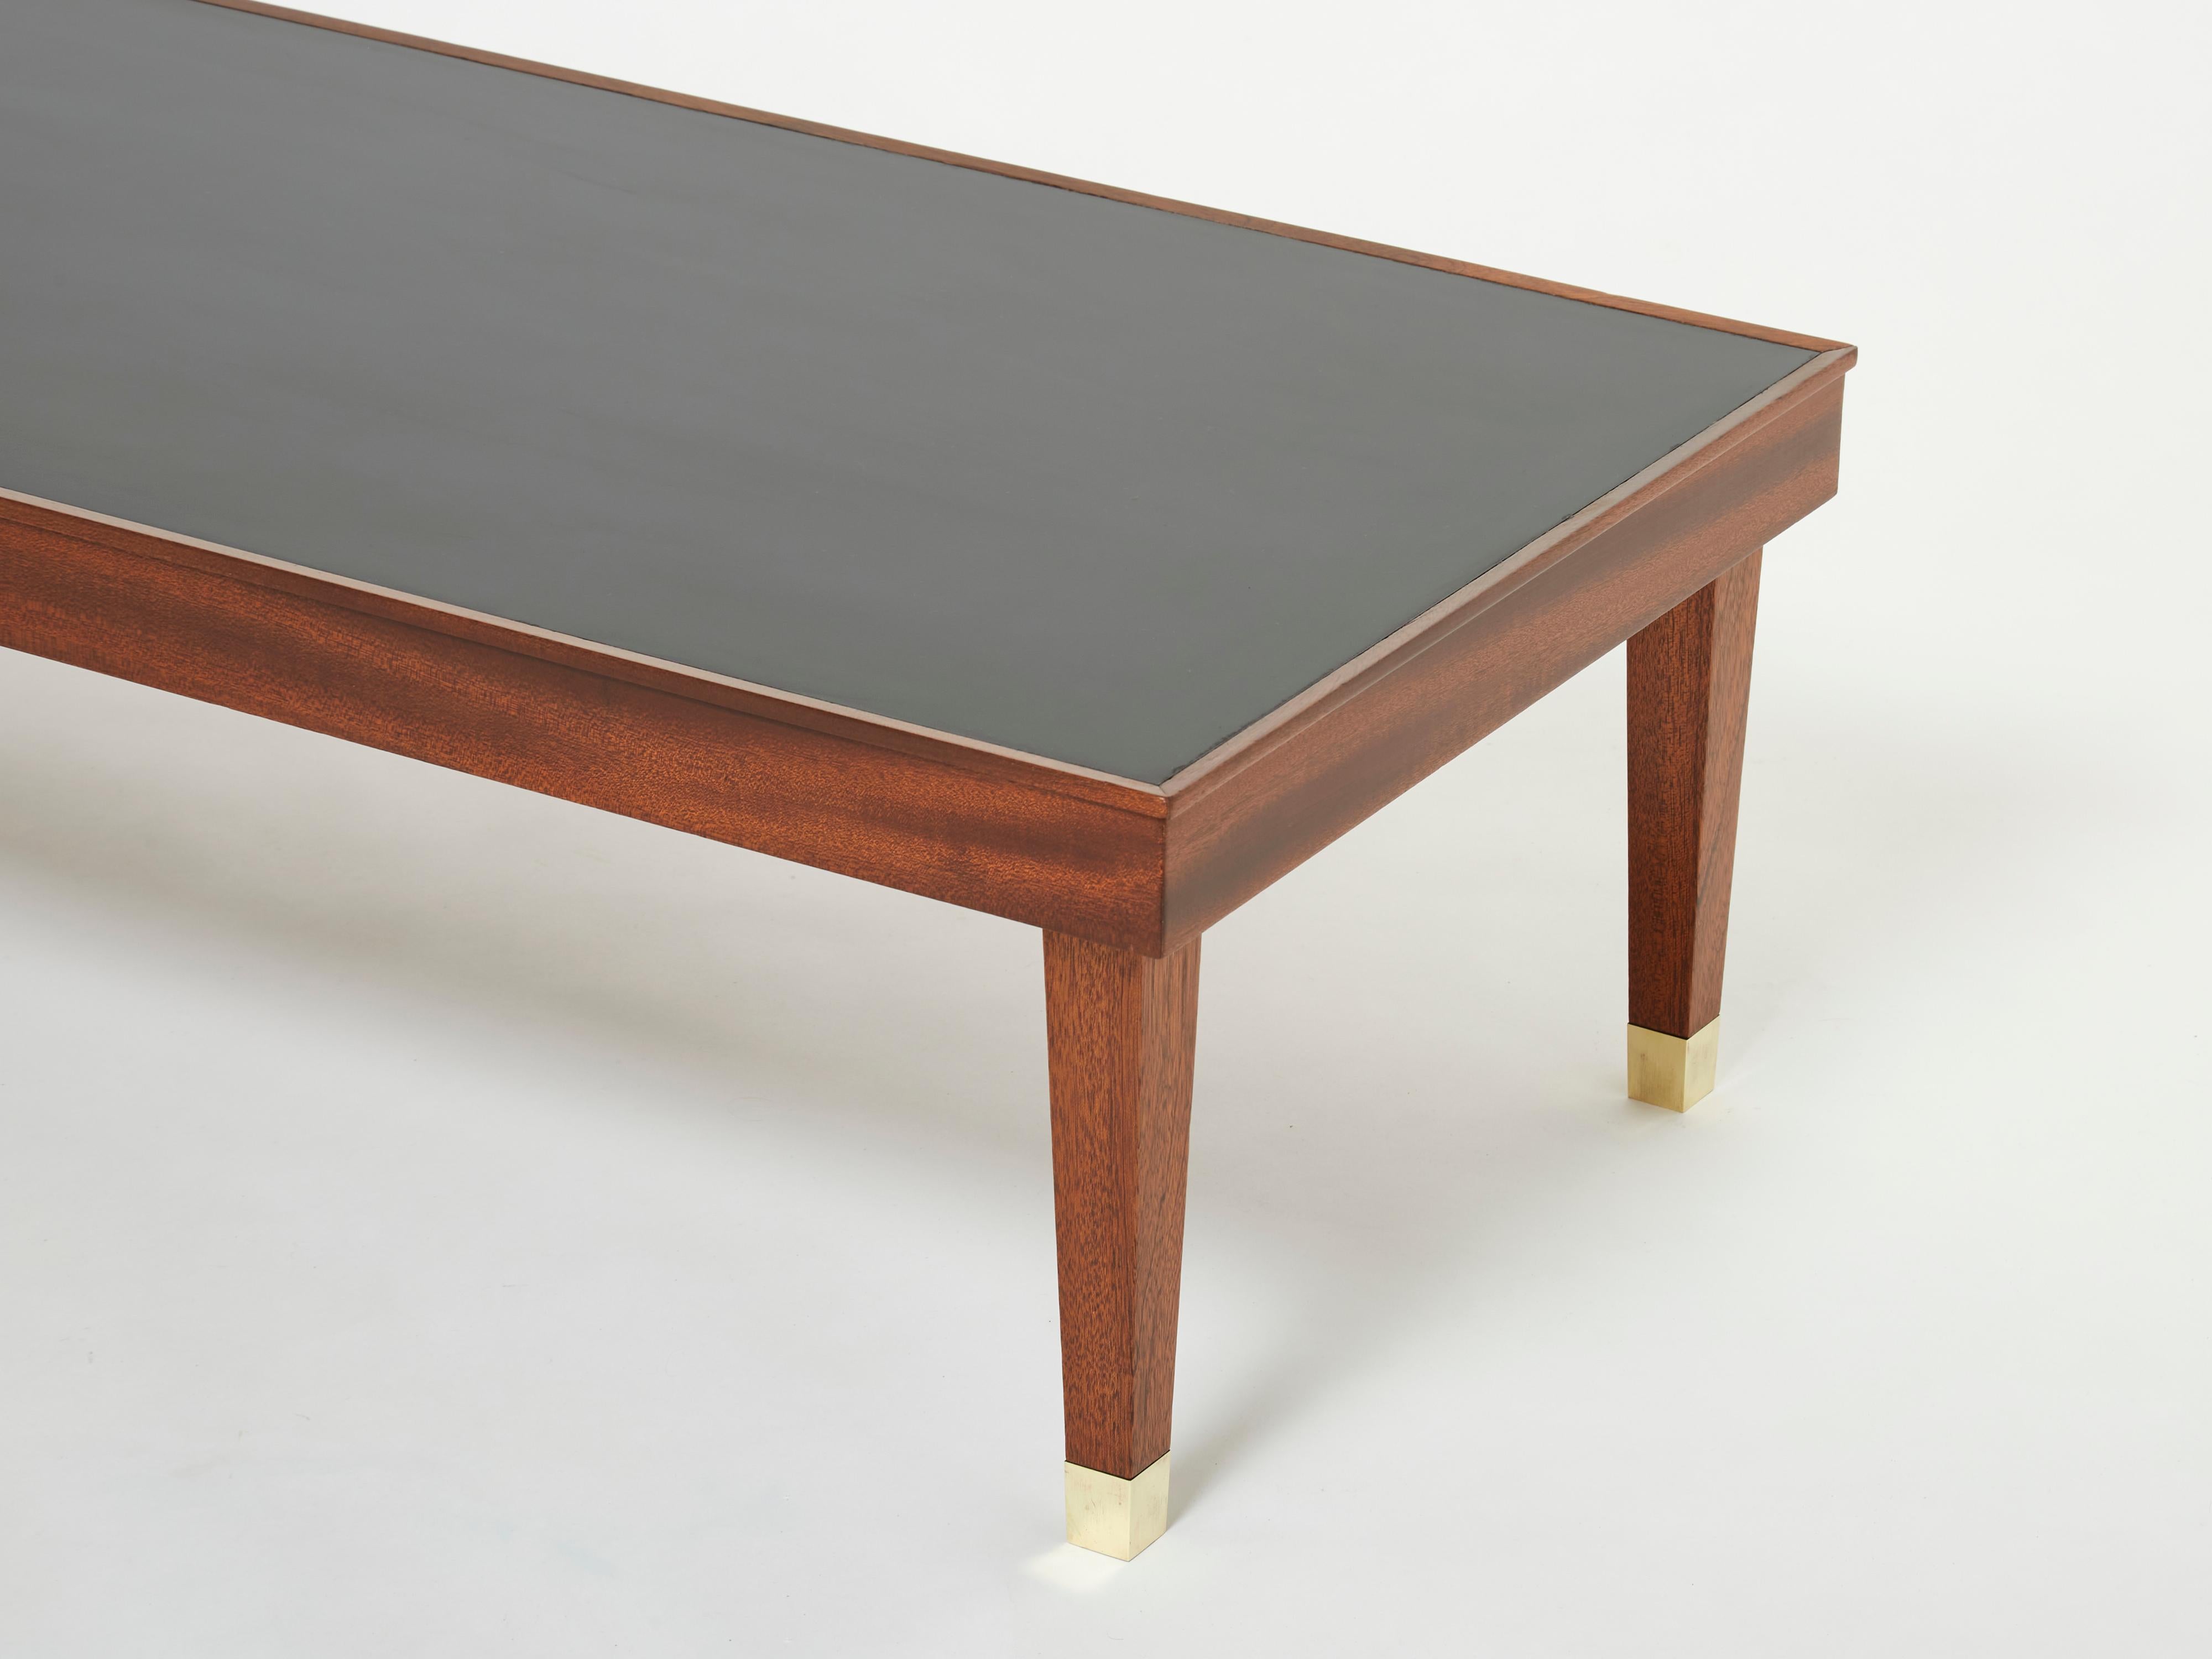 Mid-Century Modern Jacques Adnet Mahogany Brass Modernist Coffee Table, 1950s For Sale